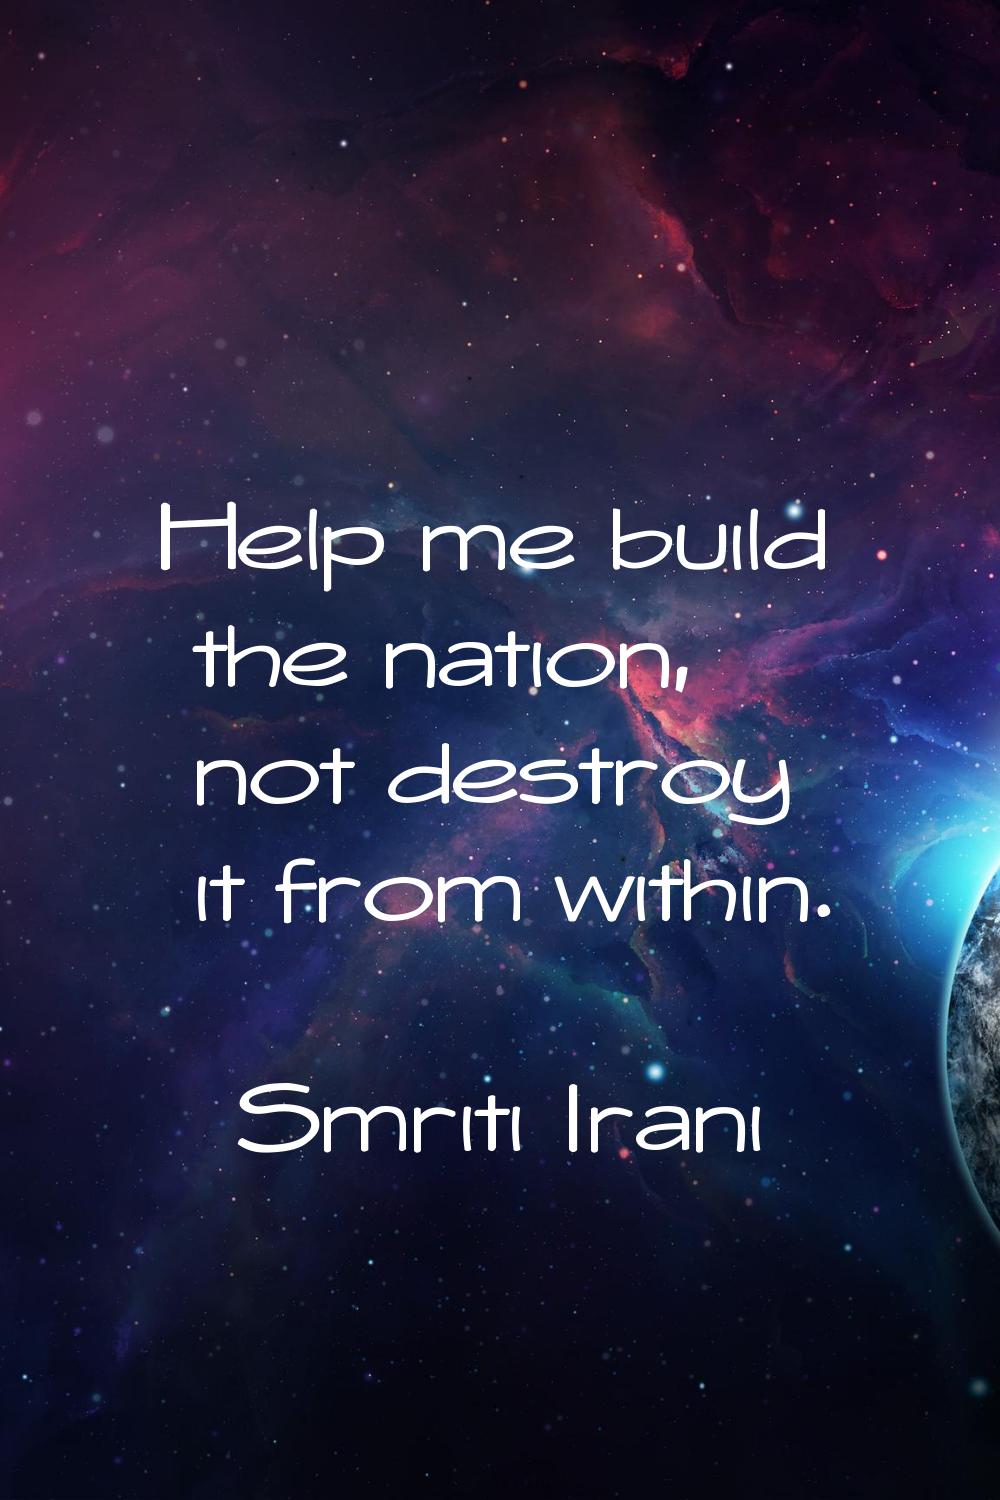 Help me build the nation, not destroy it from within.